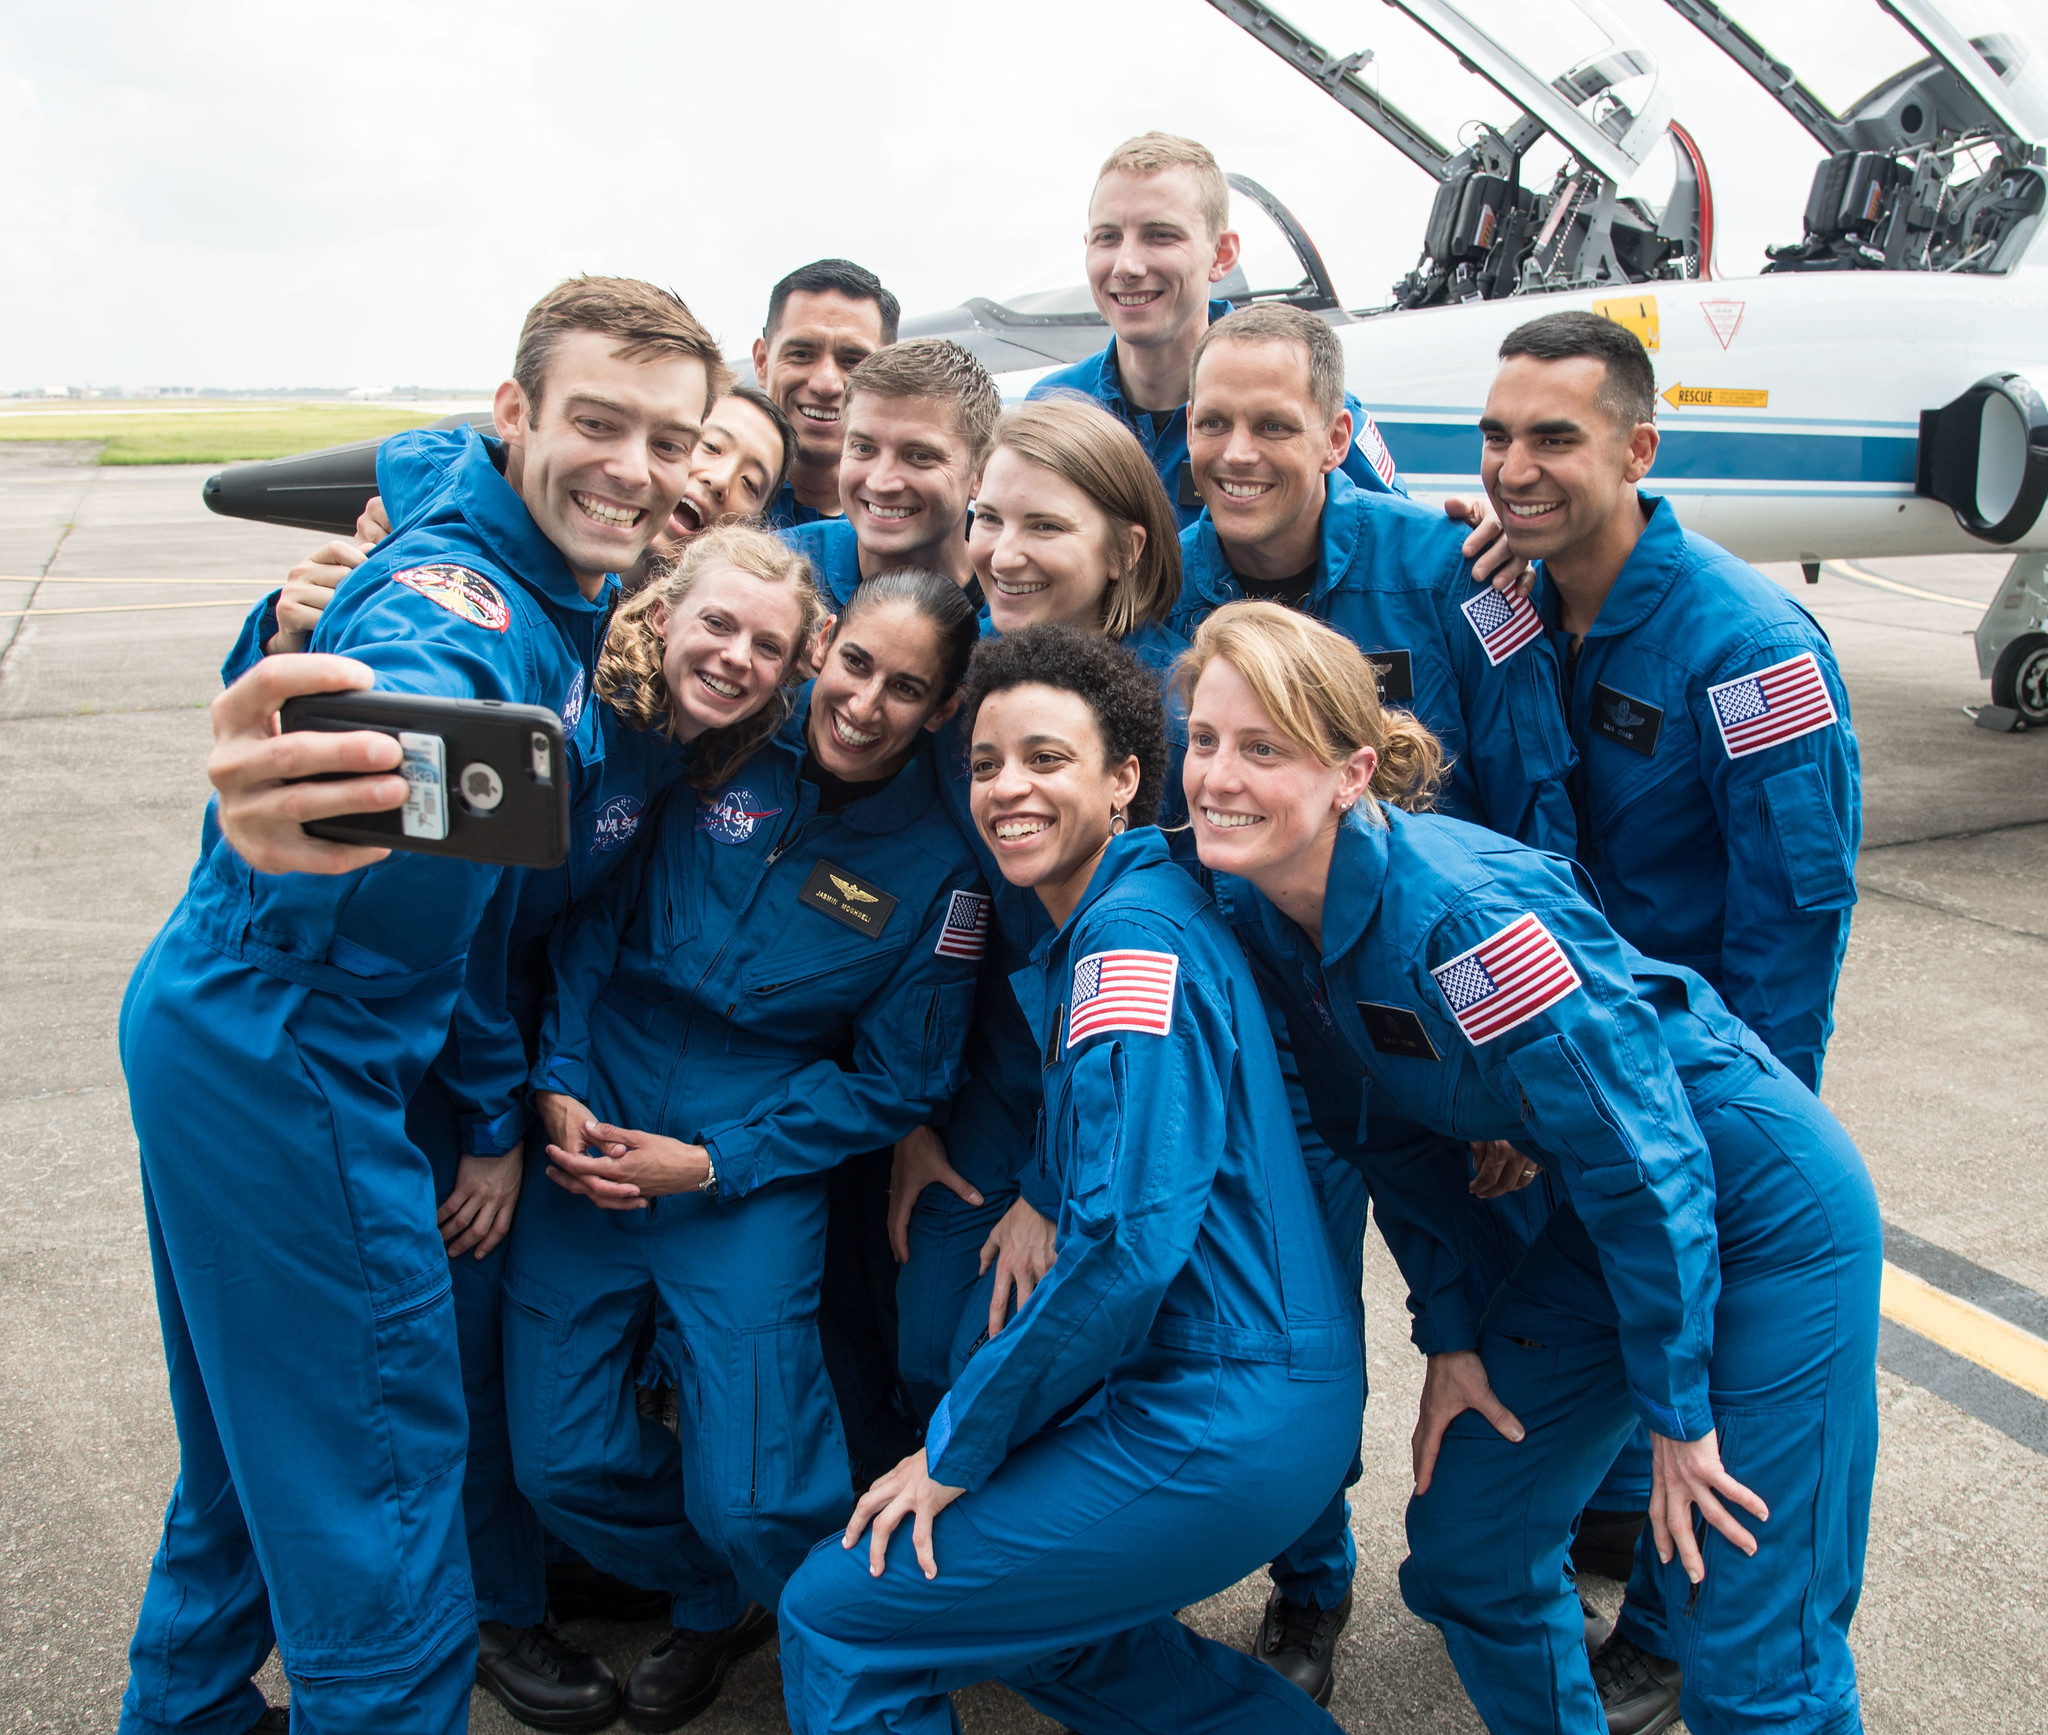 NASA’s newest astronauts ready to set foot on the Moon again